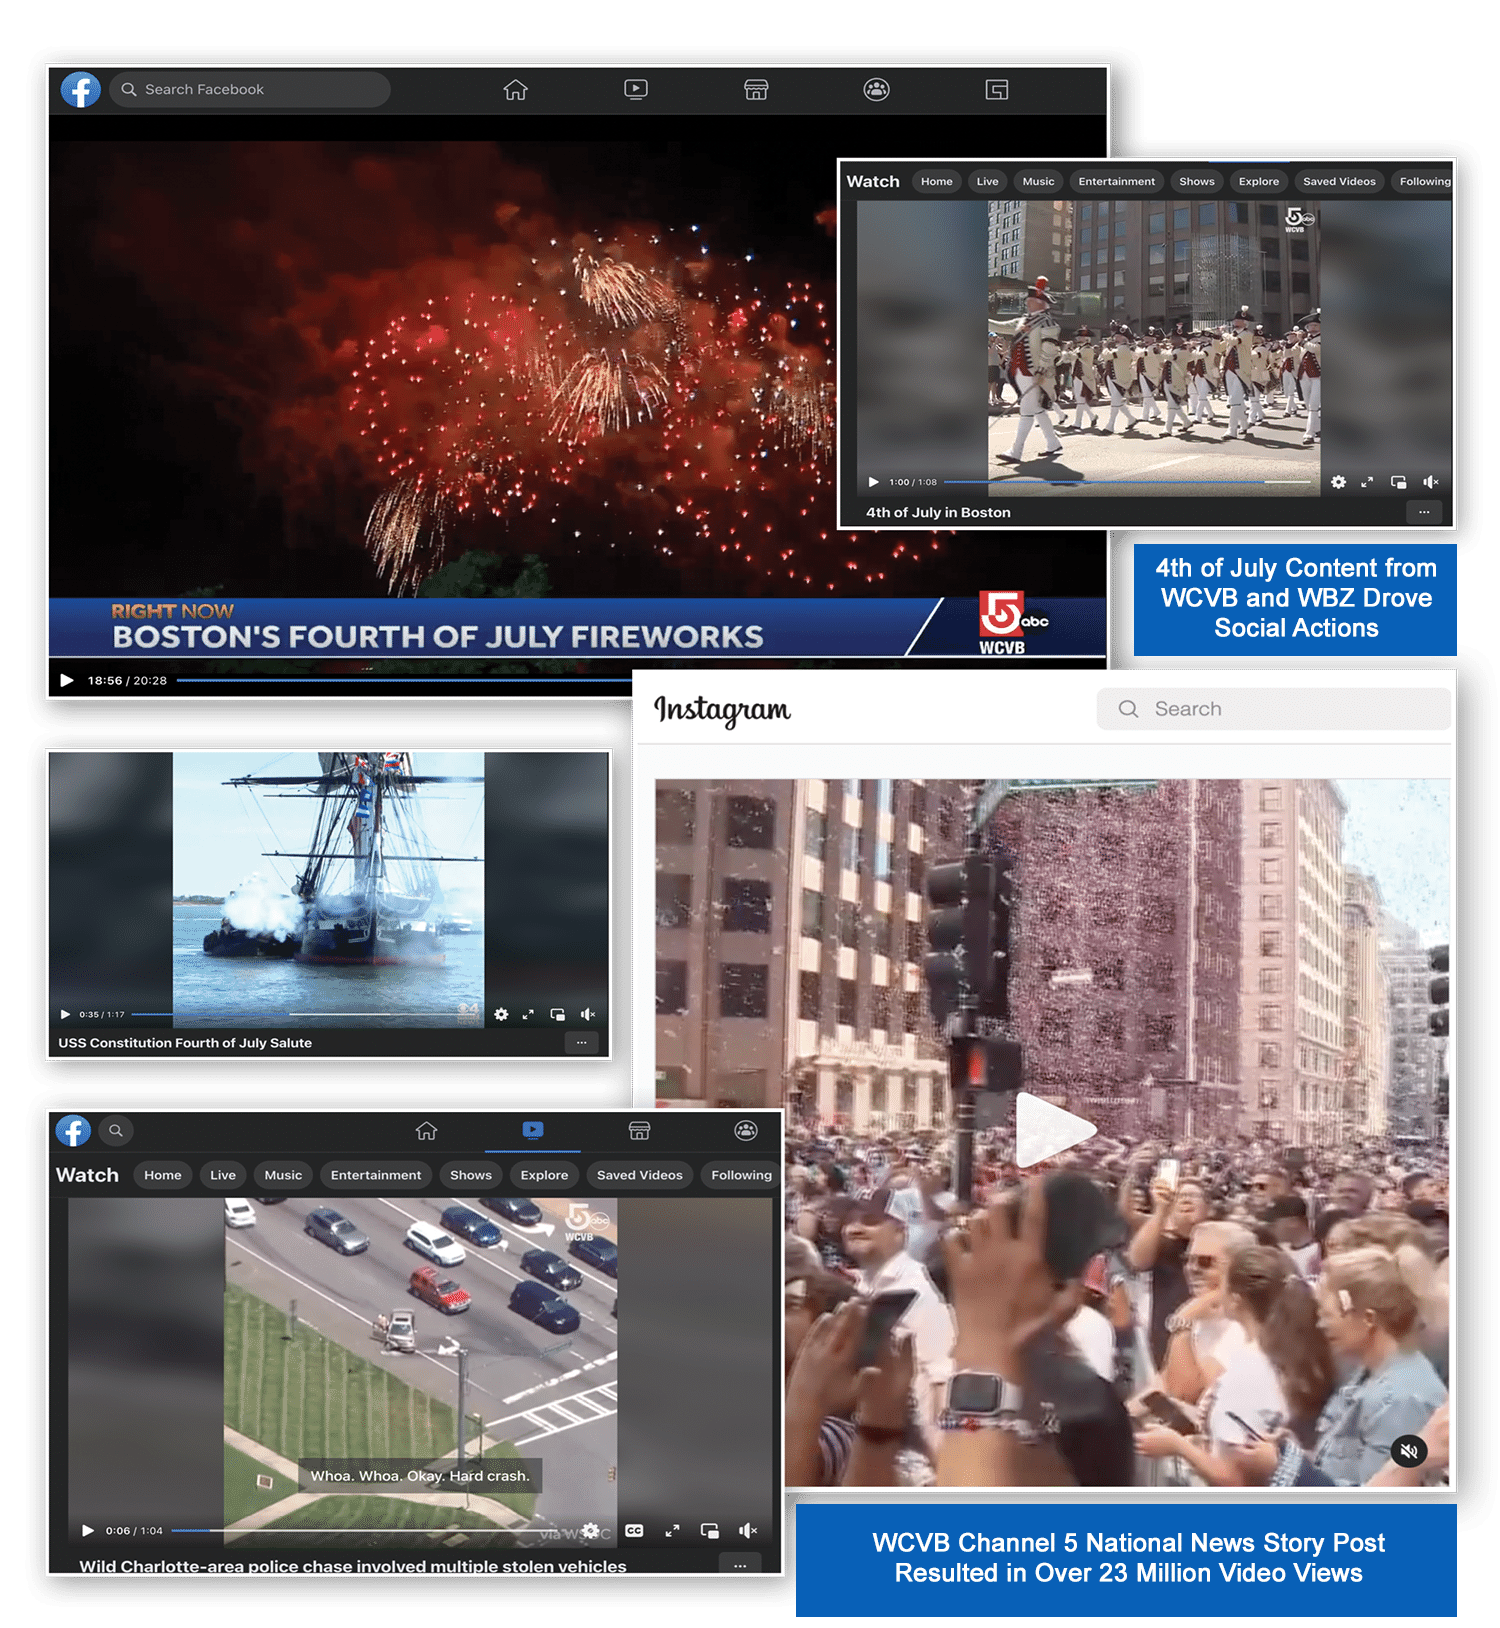 4th of July Content from WCVB and WBZ drove social actions